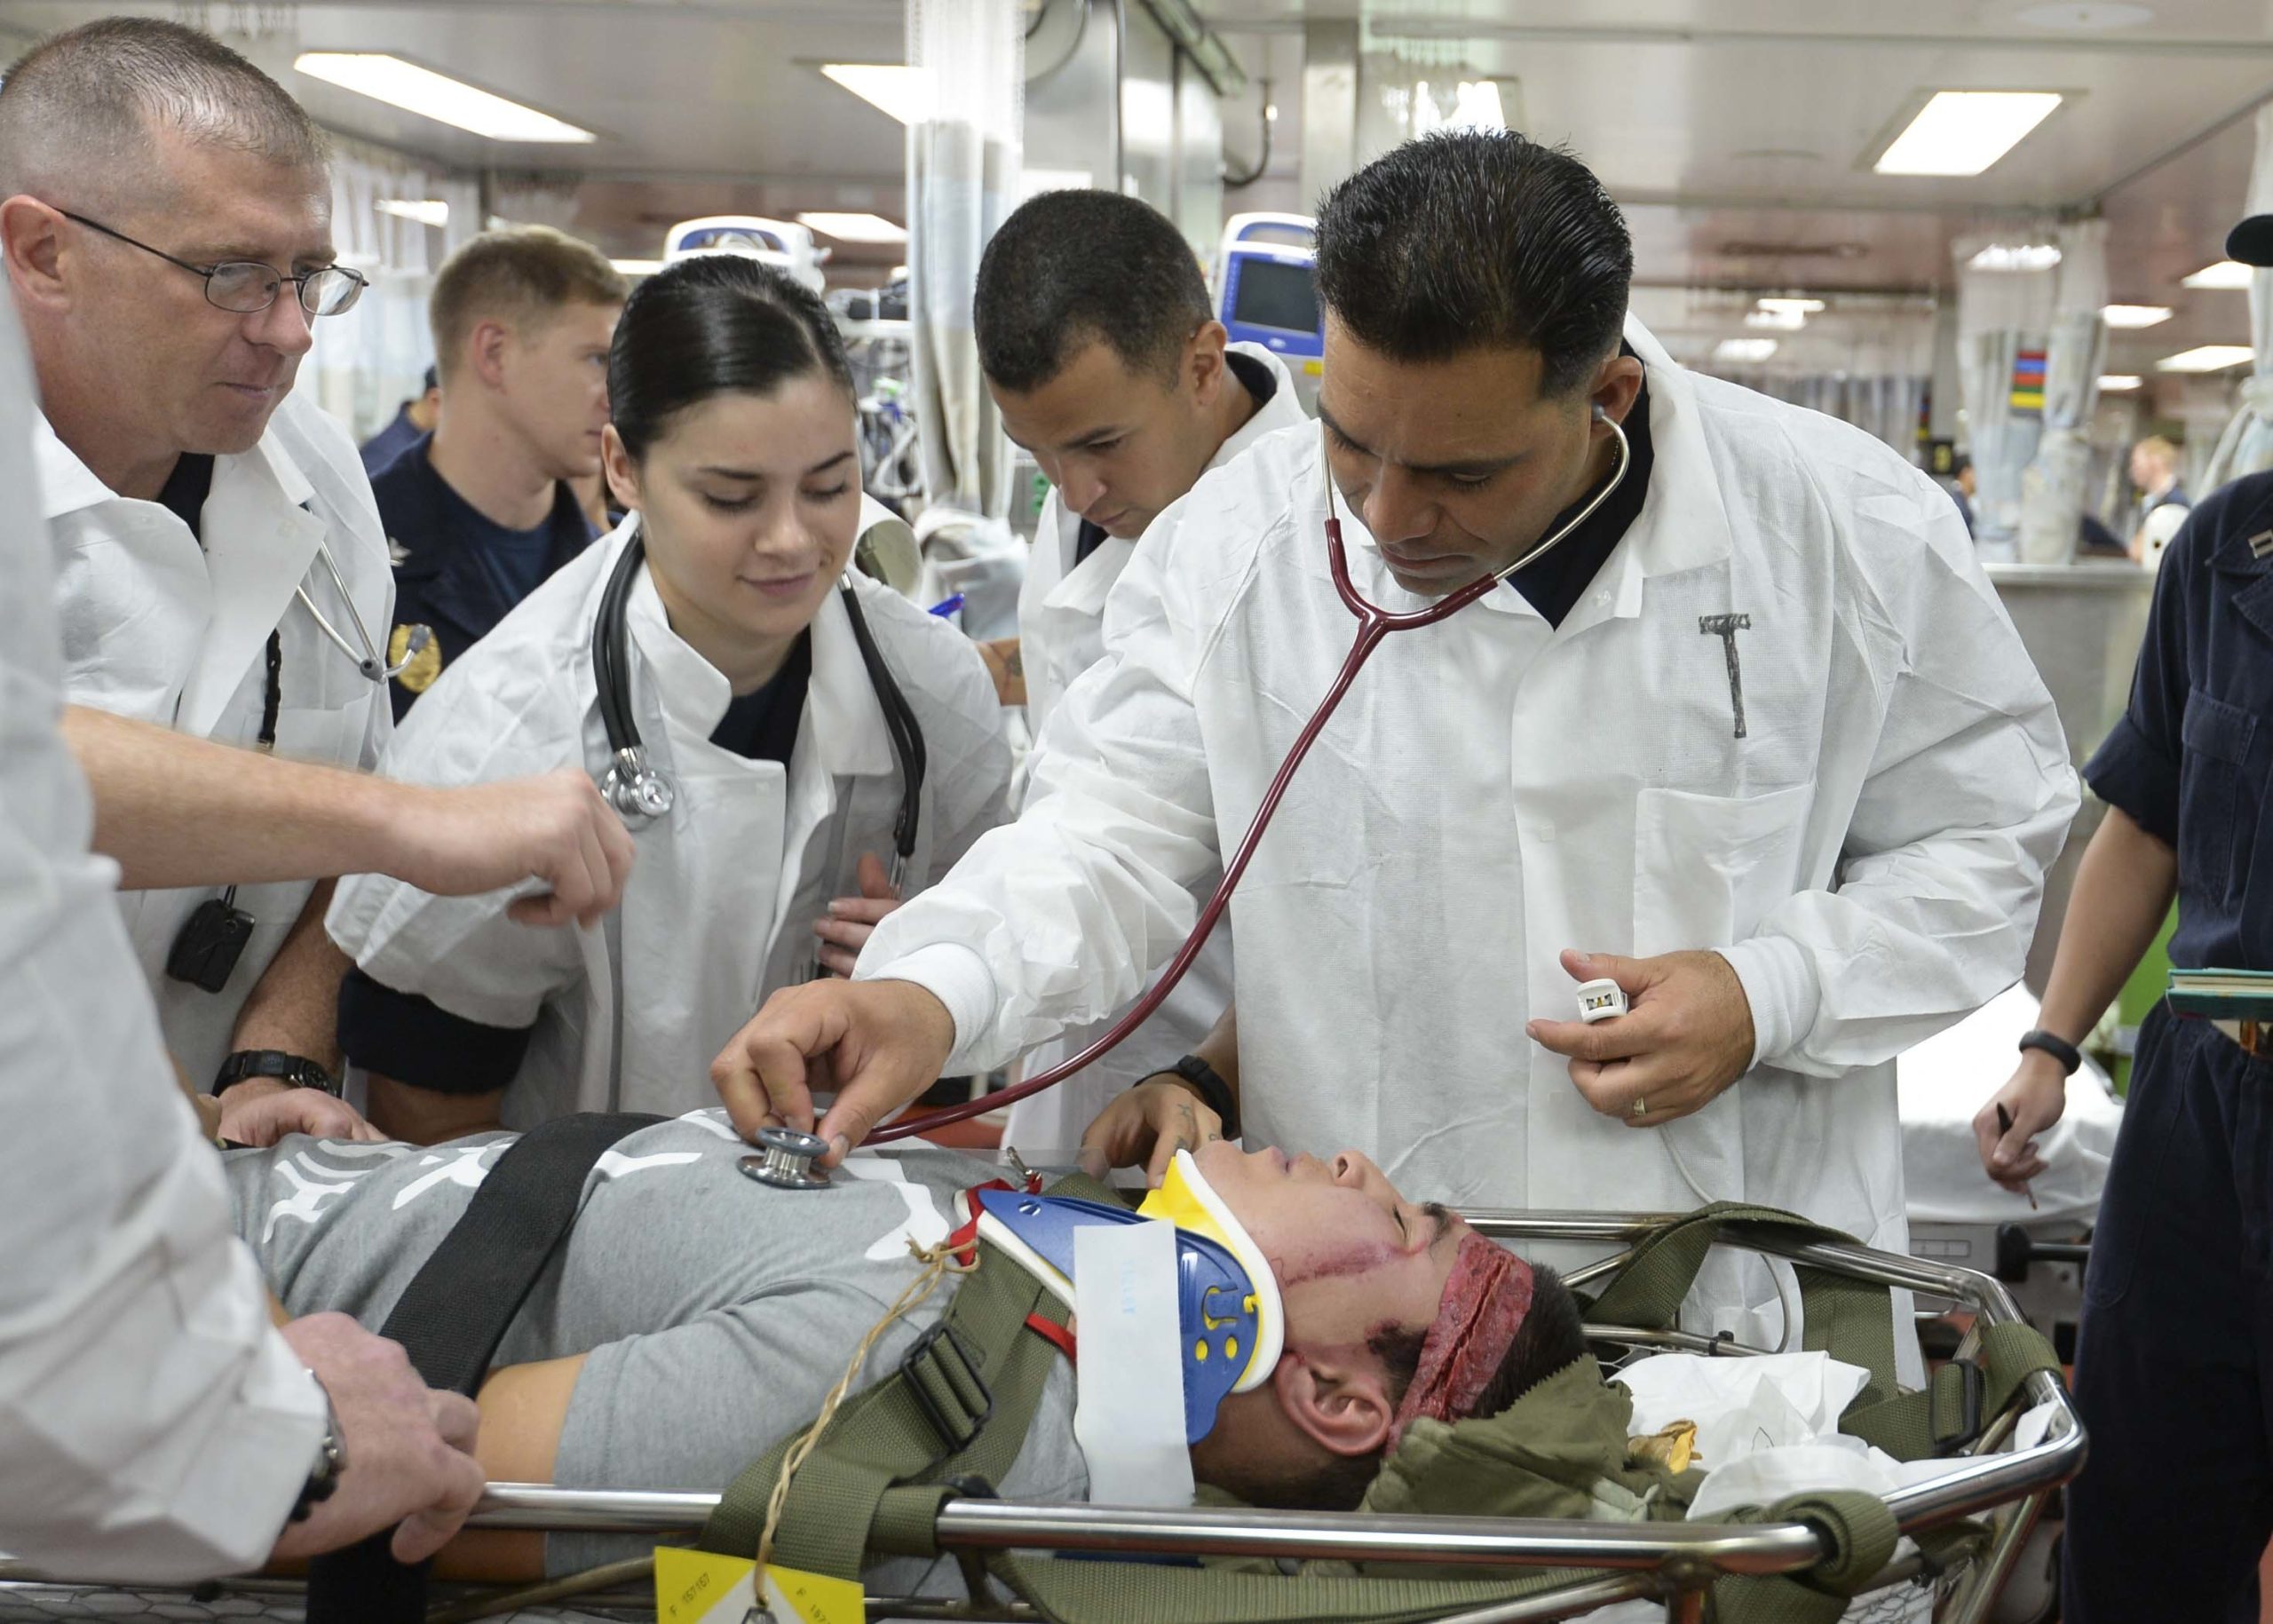 drill, mass casualty exercise